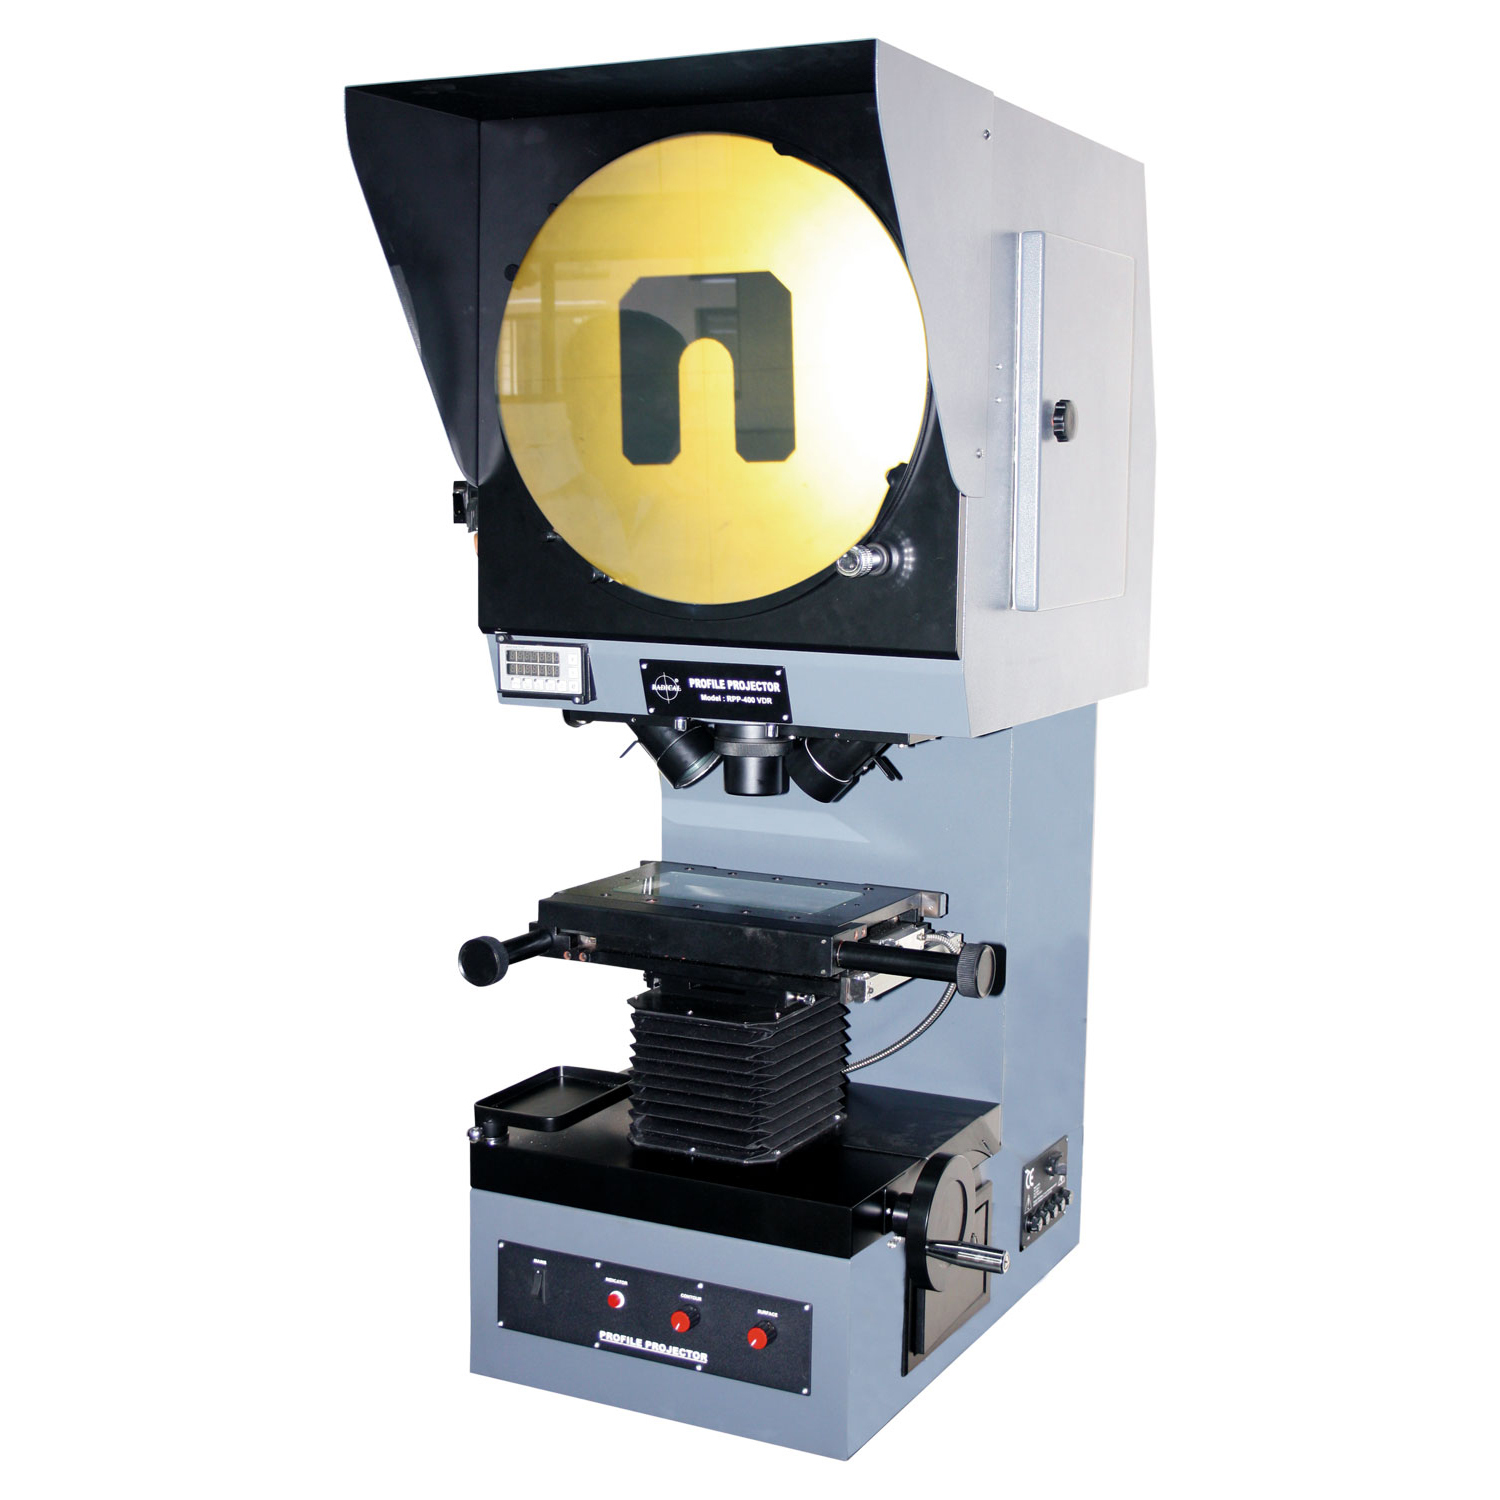 High Sharpness Profile Projector